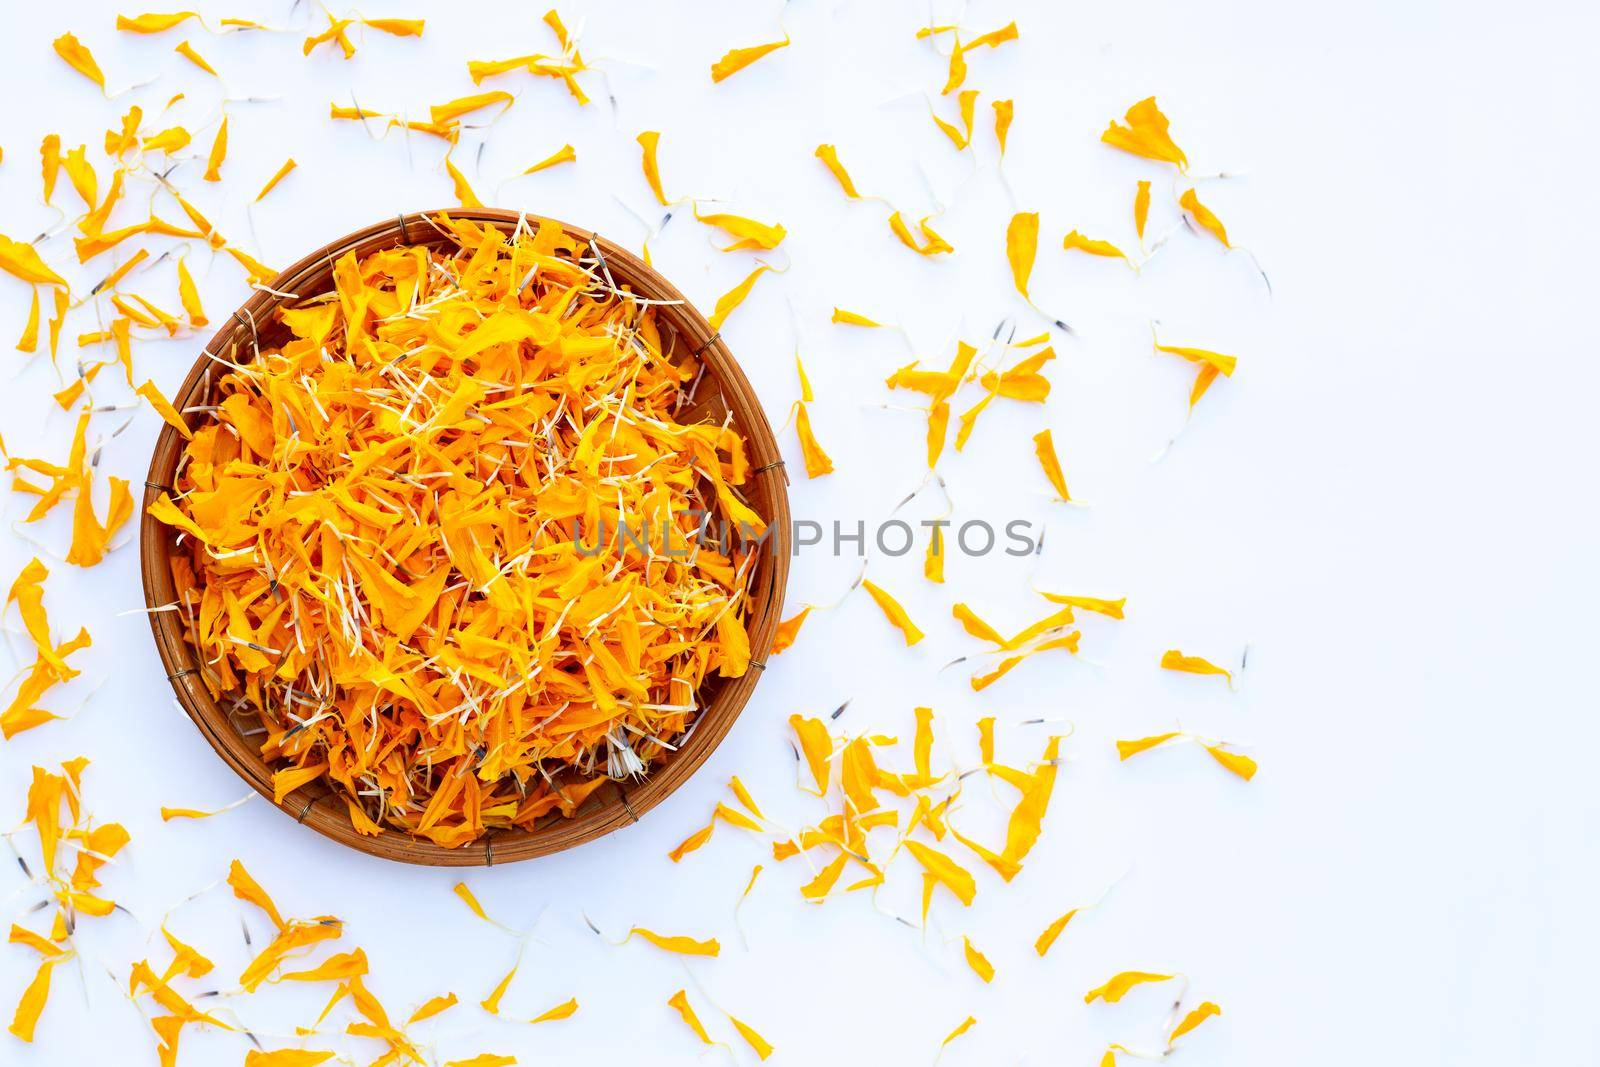 Marigold flower petals on white background. by Bowonpat